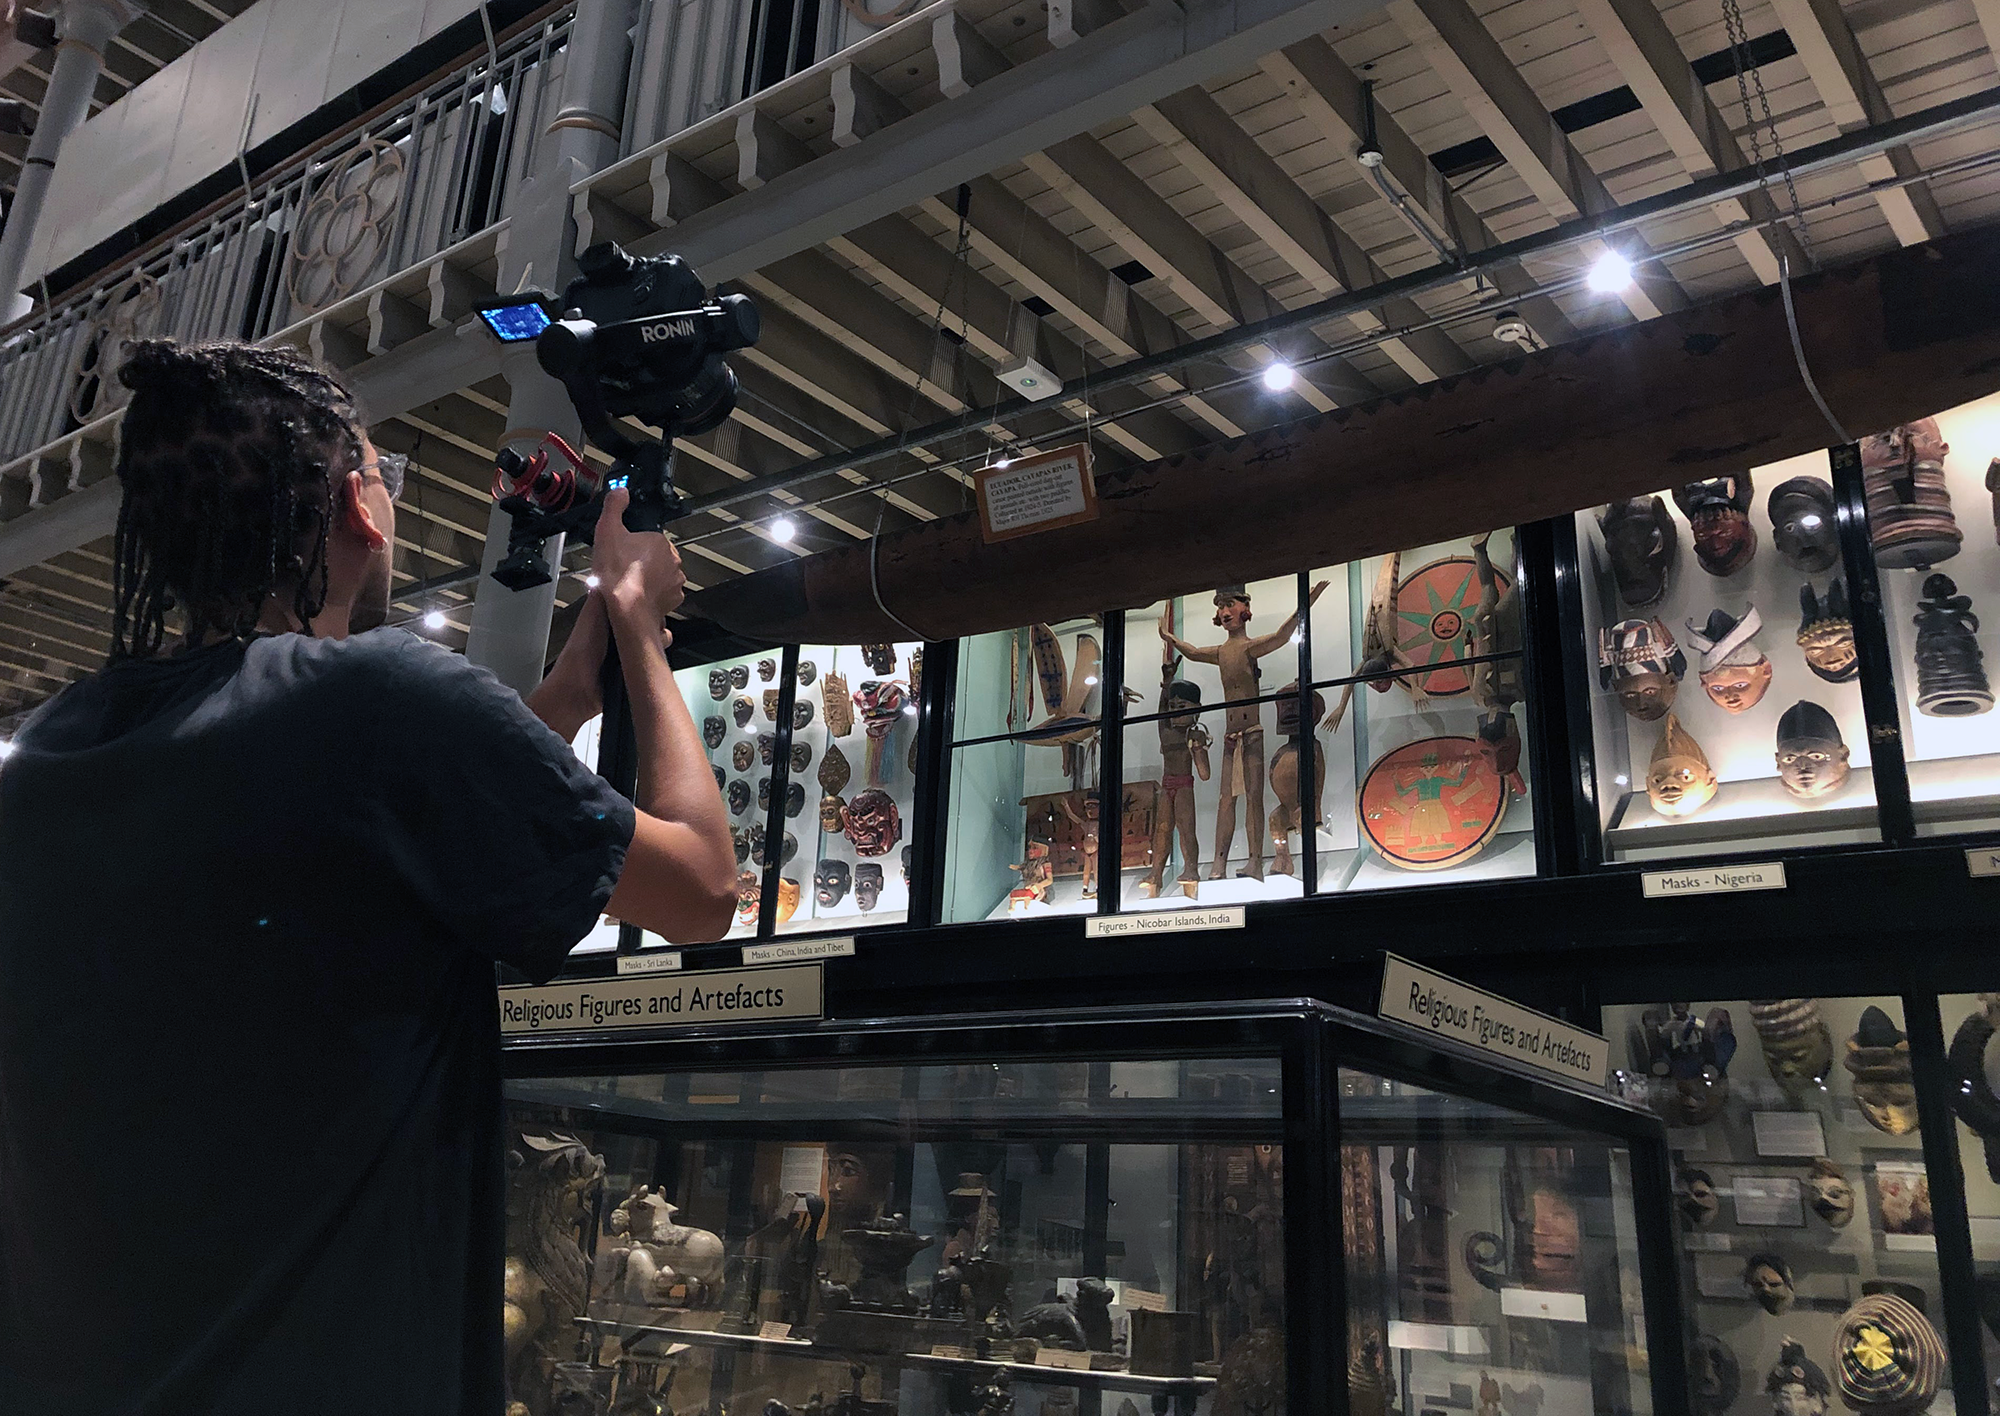 a person lifts a digital camera on a gimble above their shoulders, pointed at objects display in tall glass cases at the museum.